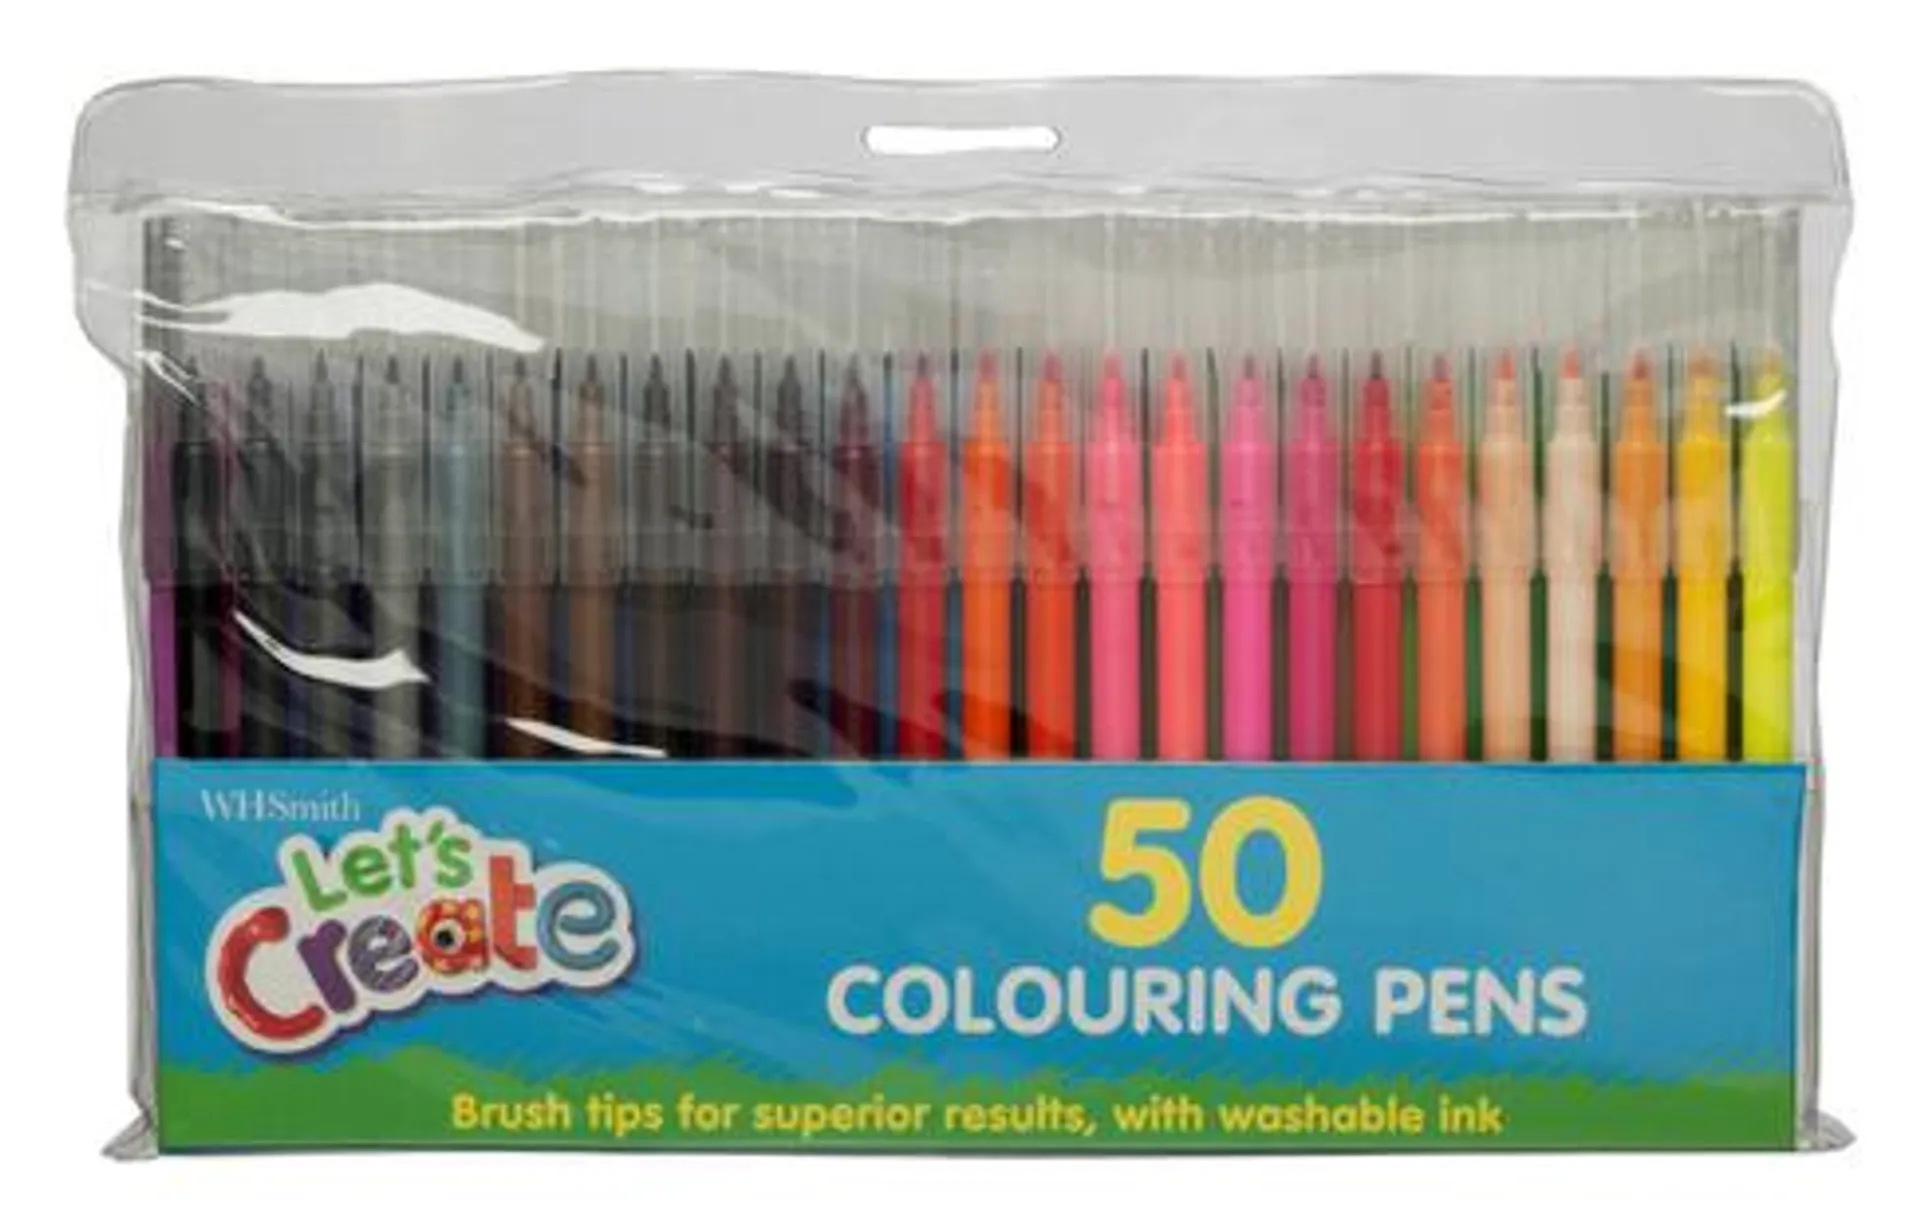 WHSmith Let's Create Colouring Pens, Multi Ink (Pack of 50)